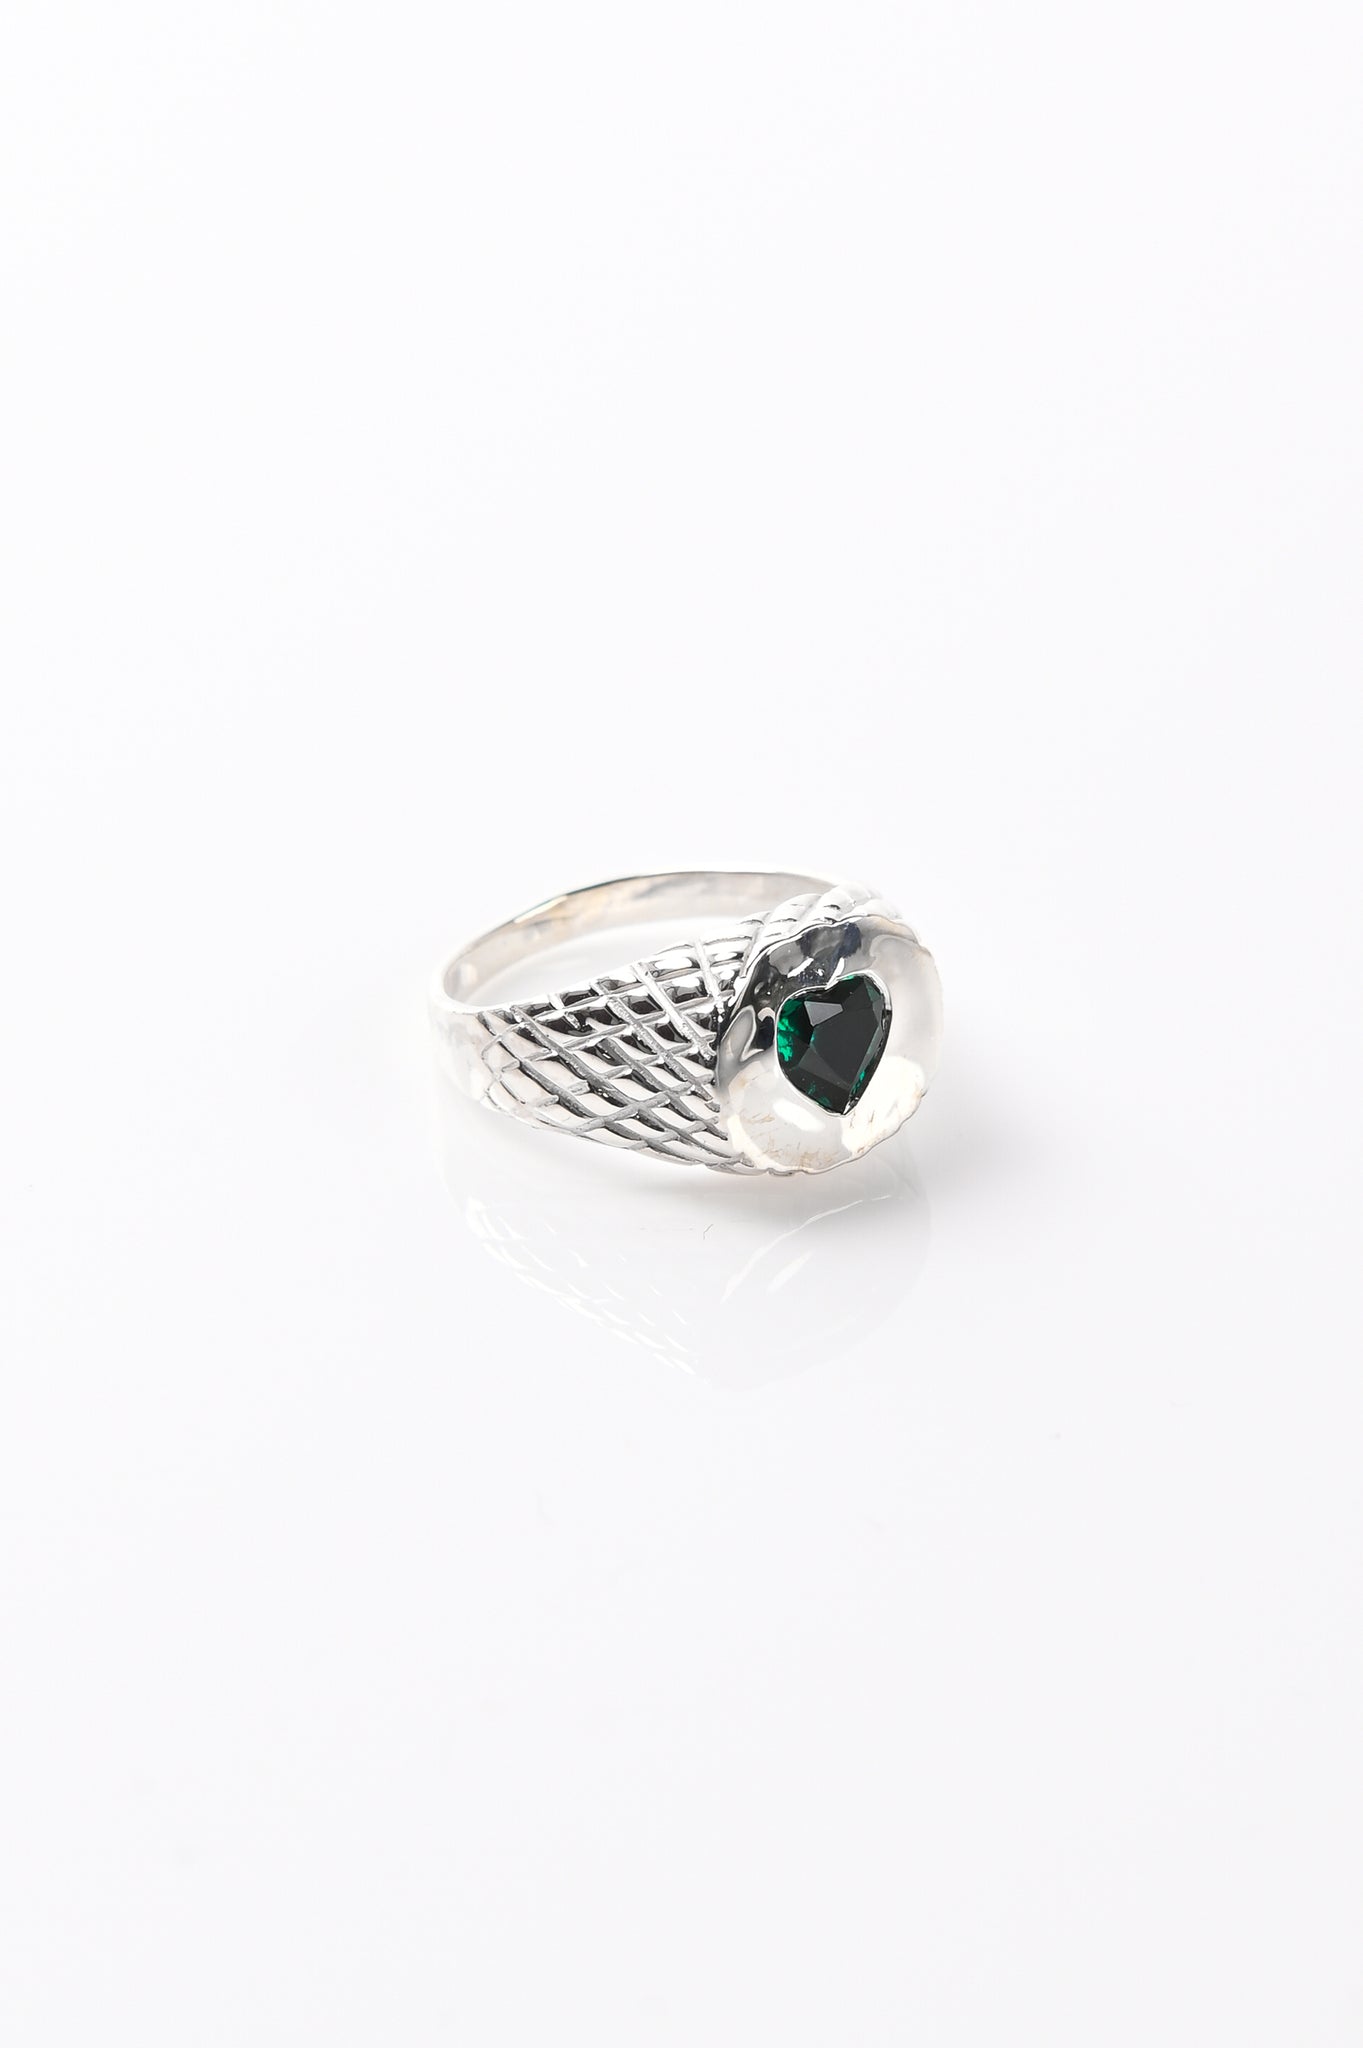 27mollys 'Heart' Ring With Emerald